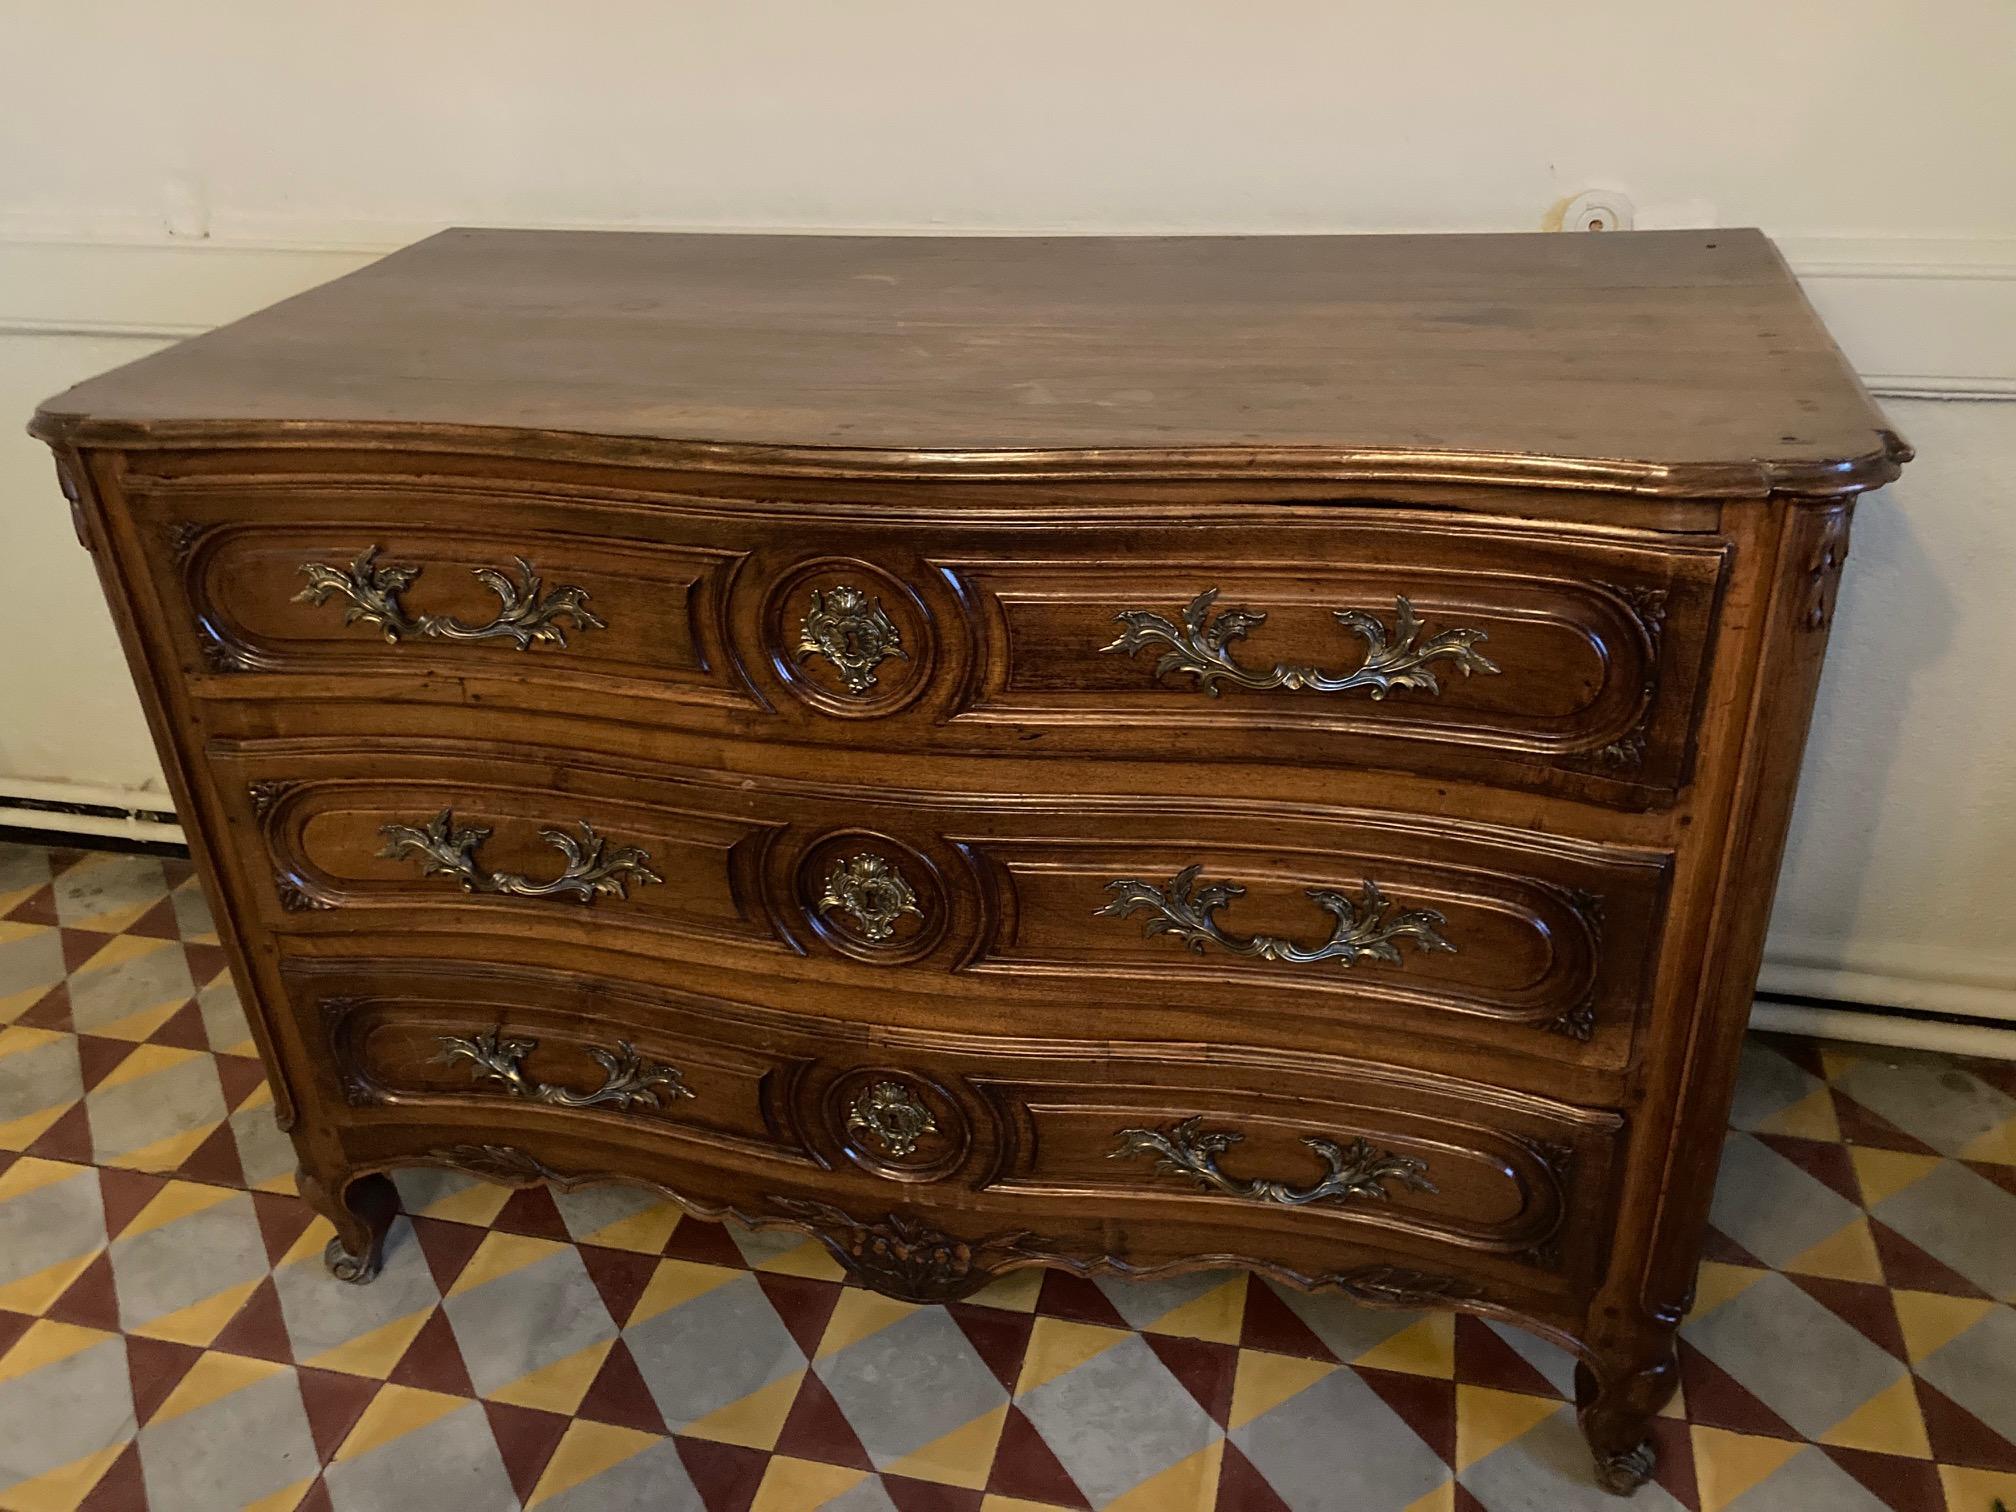 Beautiful 18th century French Louis walnut commode. 
Bronze handles and fittings. 
Three large drawers. 
Some drawer's corner are damage. Wear consistent with age and use. 
But good general condition for a commode of this age. 
Nice quality.